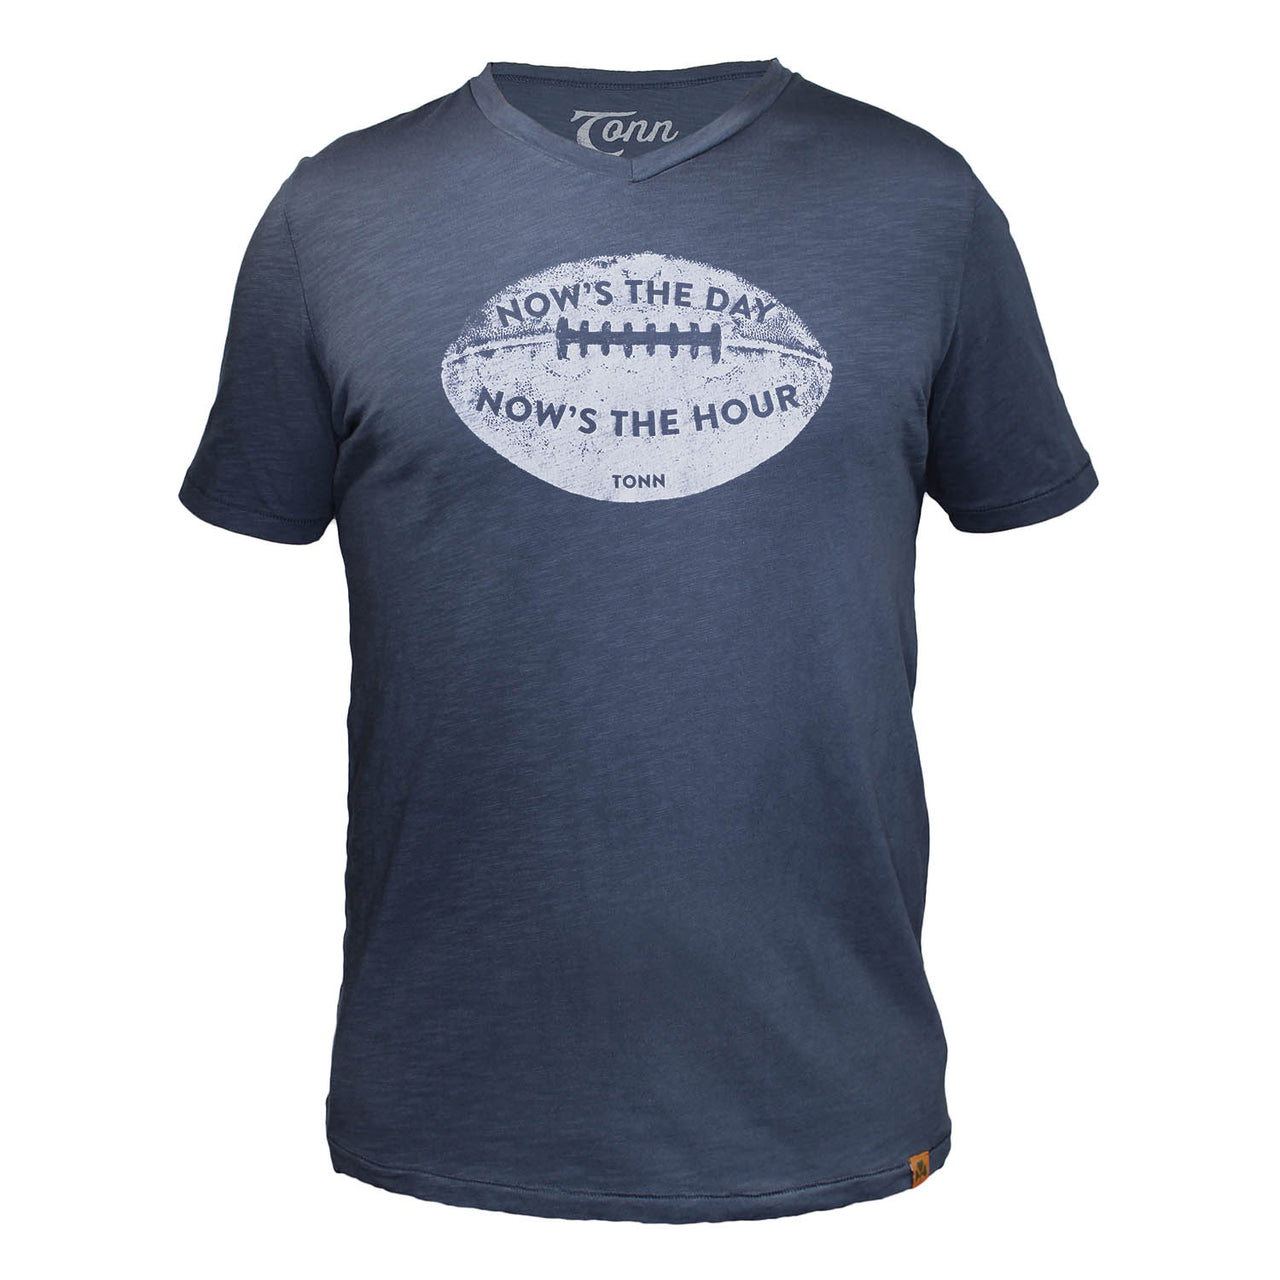 Now's the Day Rugby V-Neck Tee Navy.   ONLY XS AND 2XL LEFT!